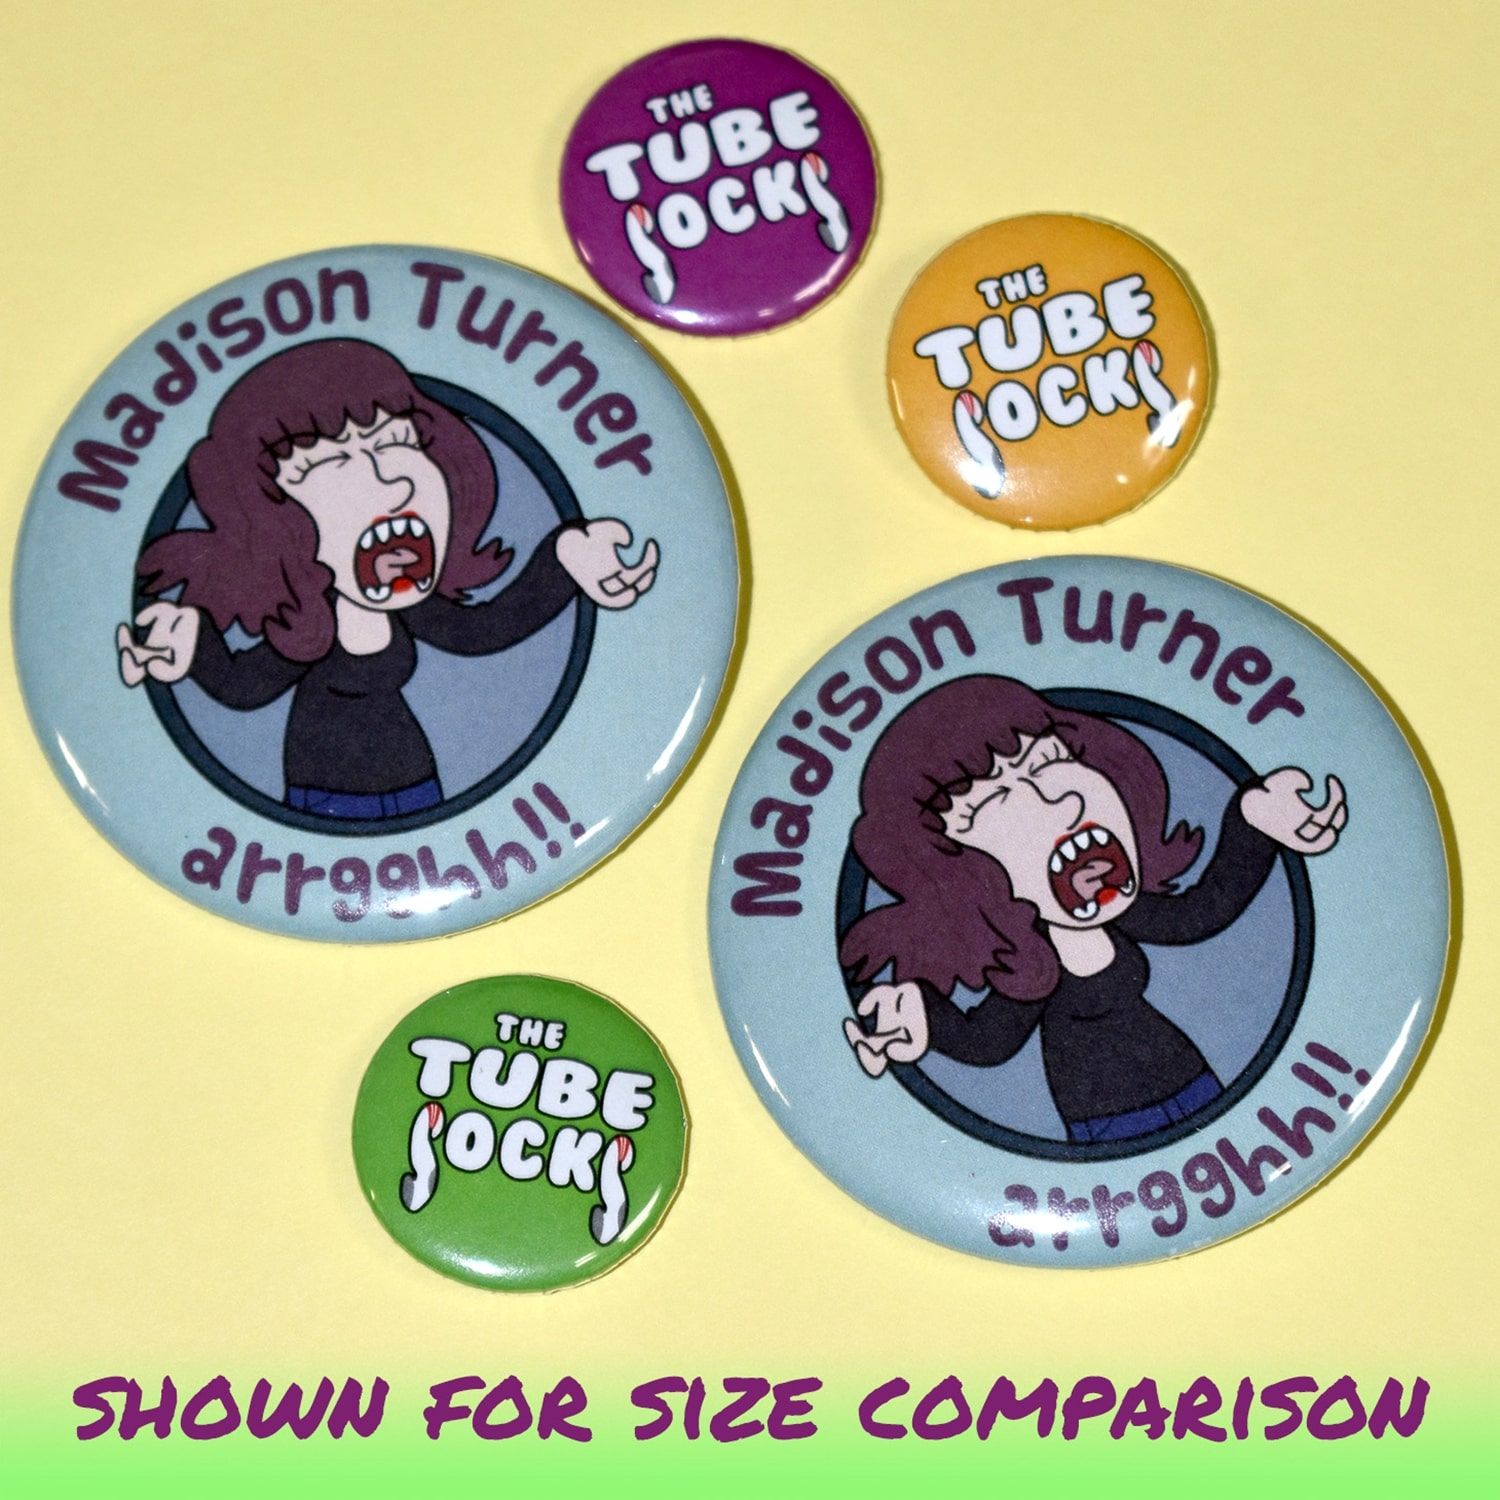 Band Buttons  Design Buttons to Promote an Artist or Music